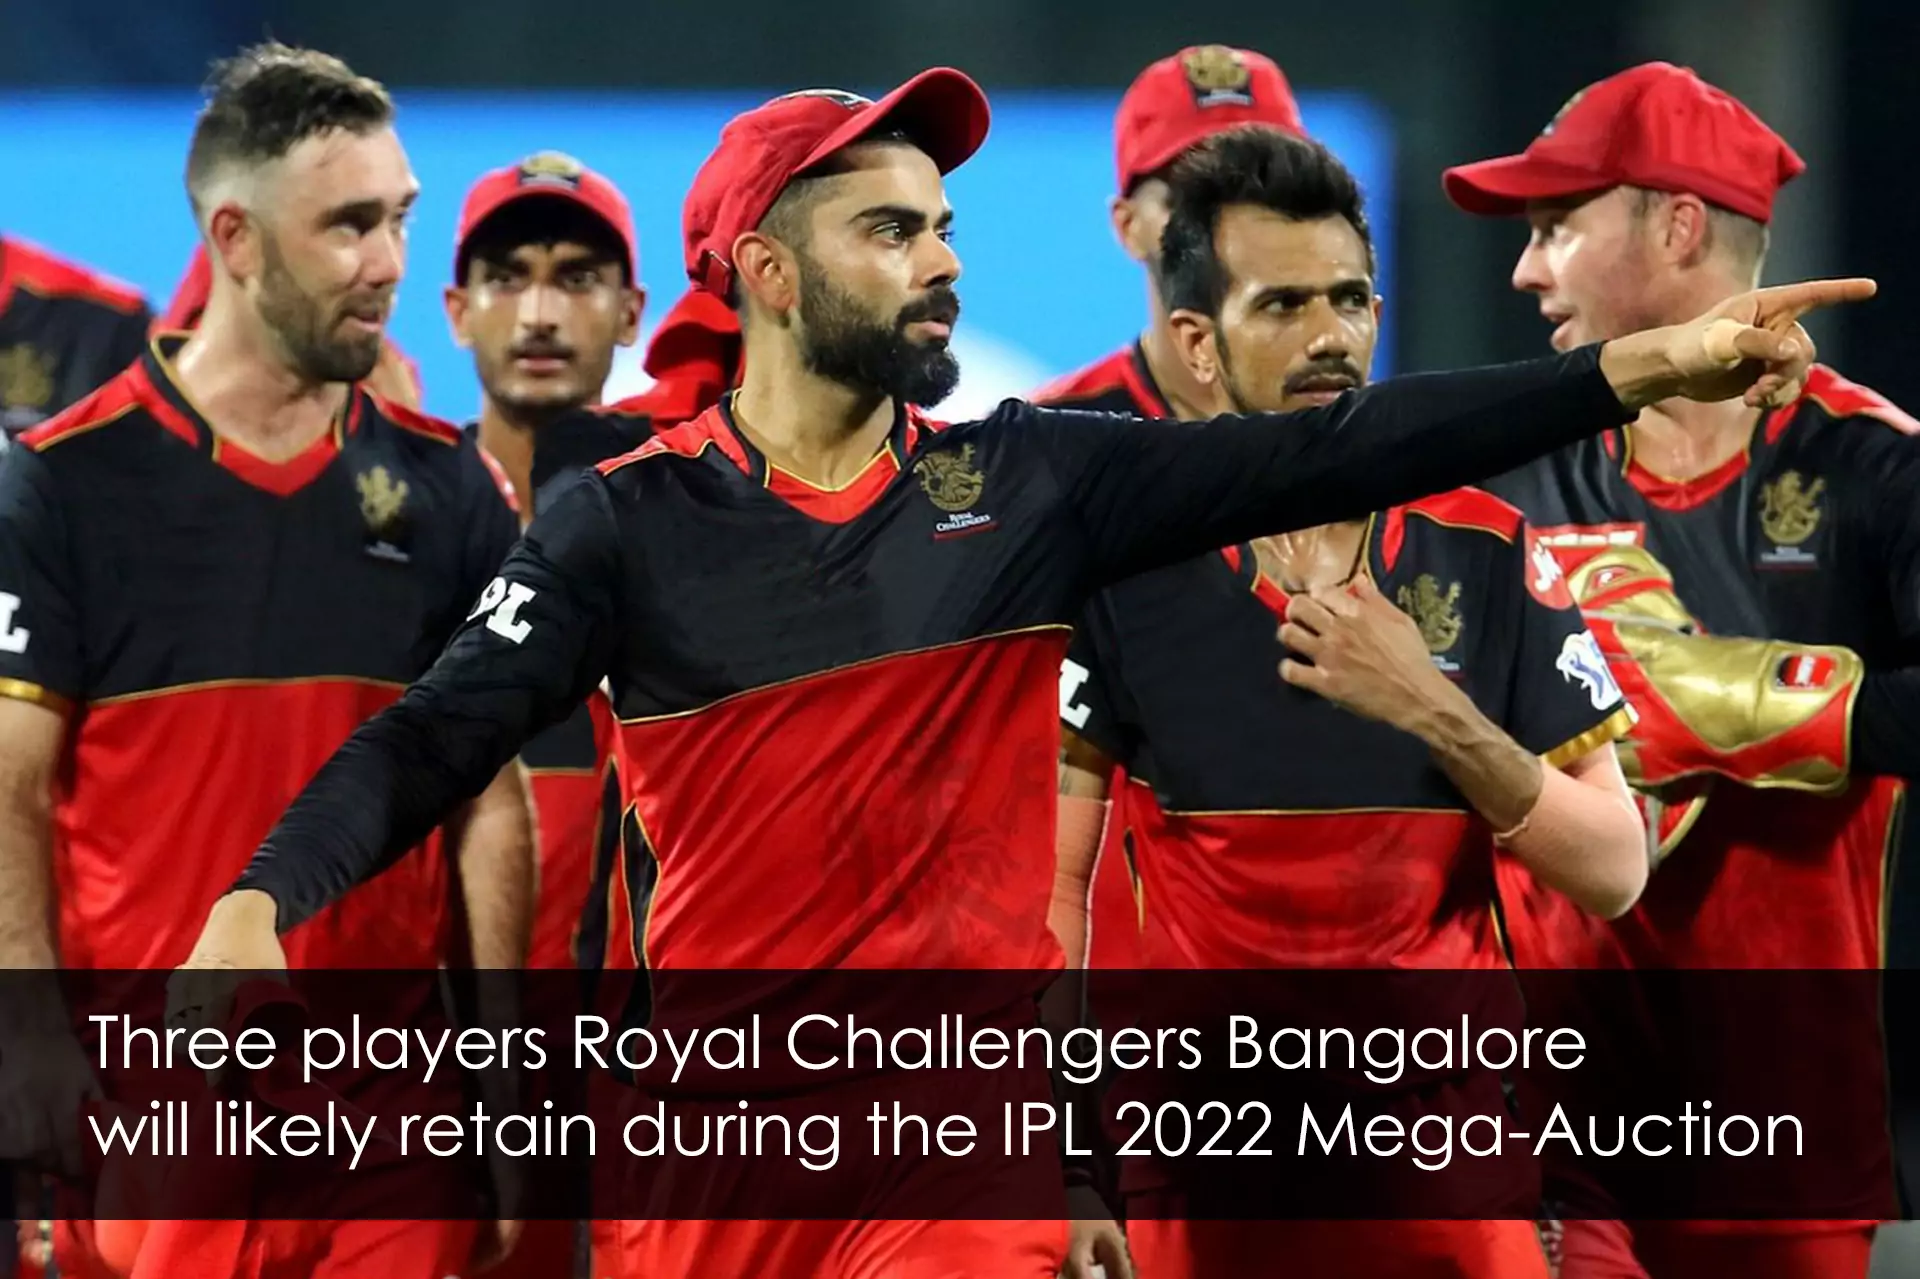 Royal Challengers Bangalore players who can be retained in the IPL 2022.